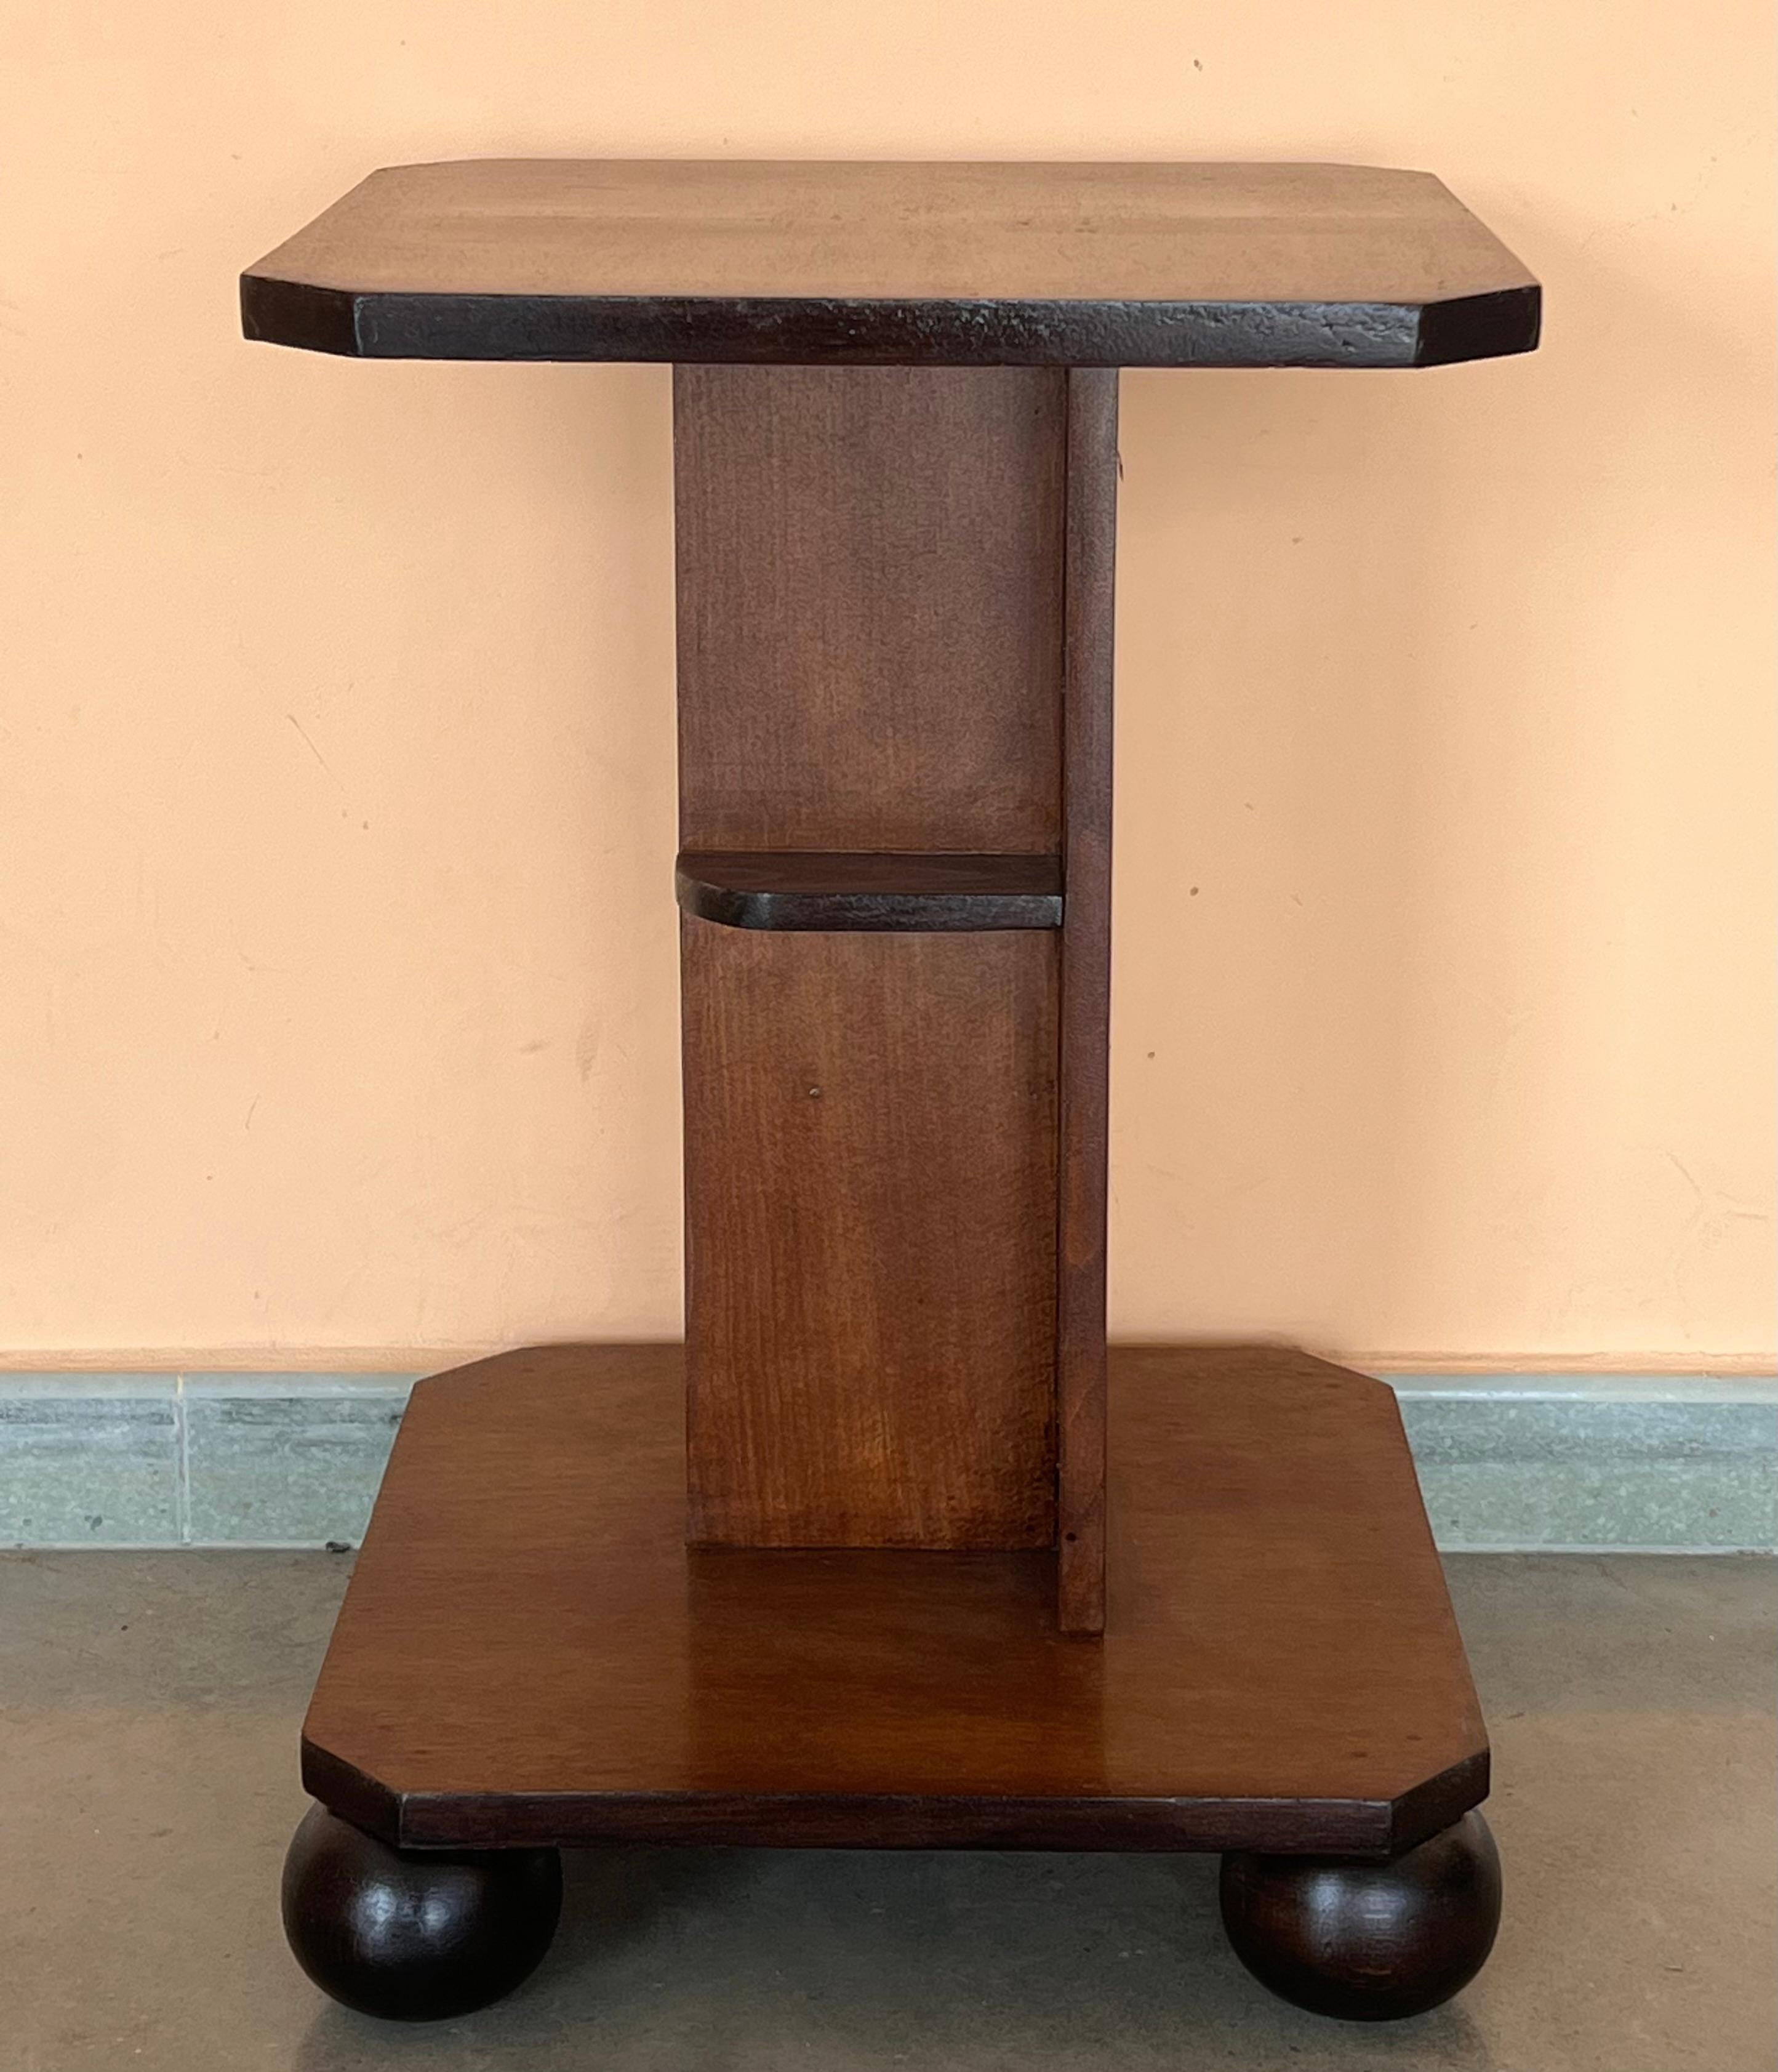 Italian Art Deco octogonal side table, circa 1930s. Narrow ebonized feet and round finial at center base set off the figured walnut. Lower smaller round tier. Unknown maker